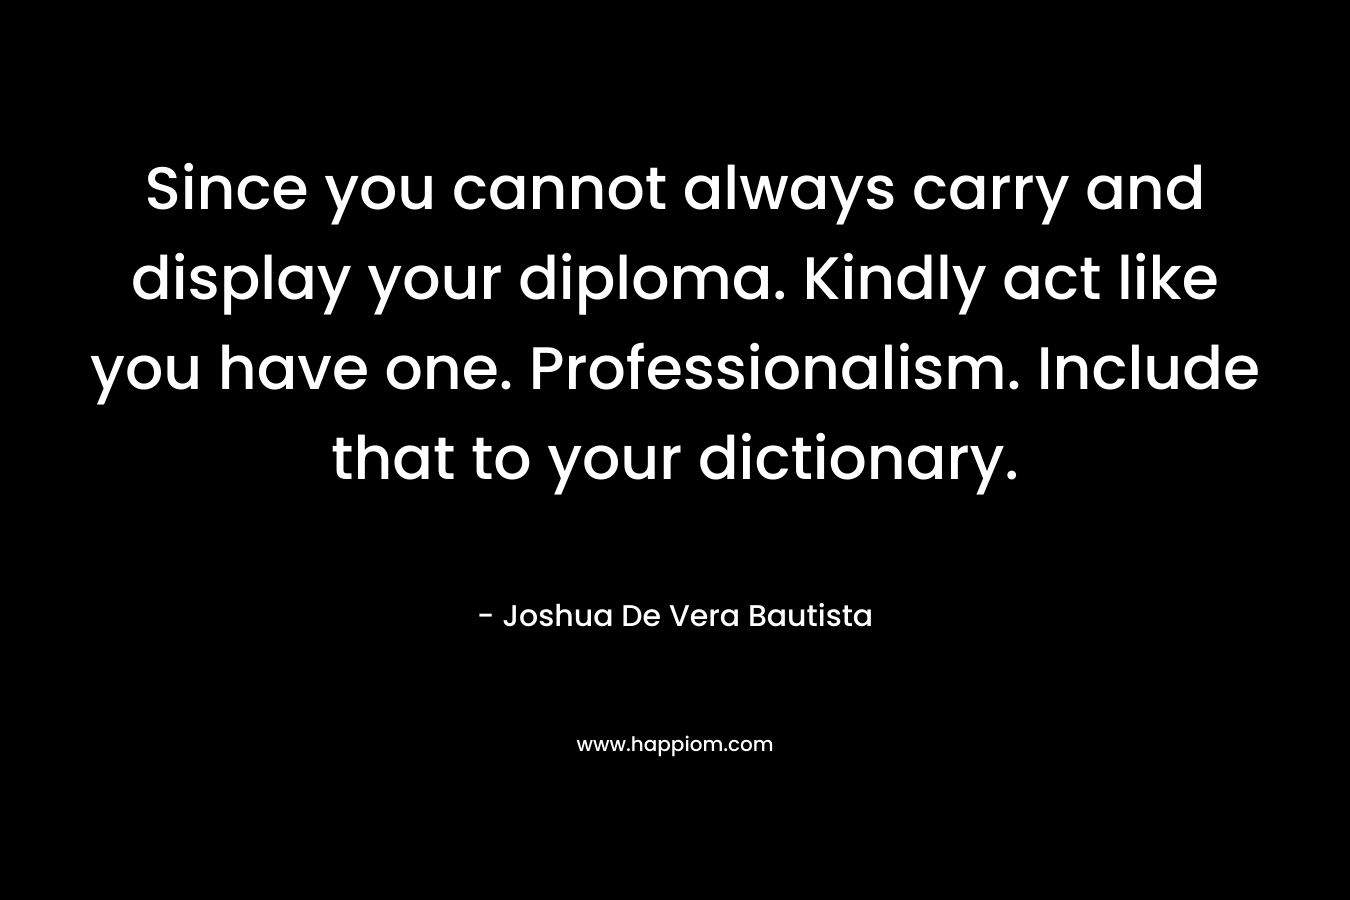 Since you cannot always carry and display your diploma. Kindly act like you have one. Professionalism. Include that to your dictionary.